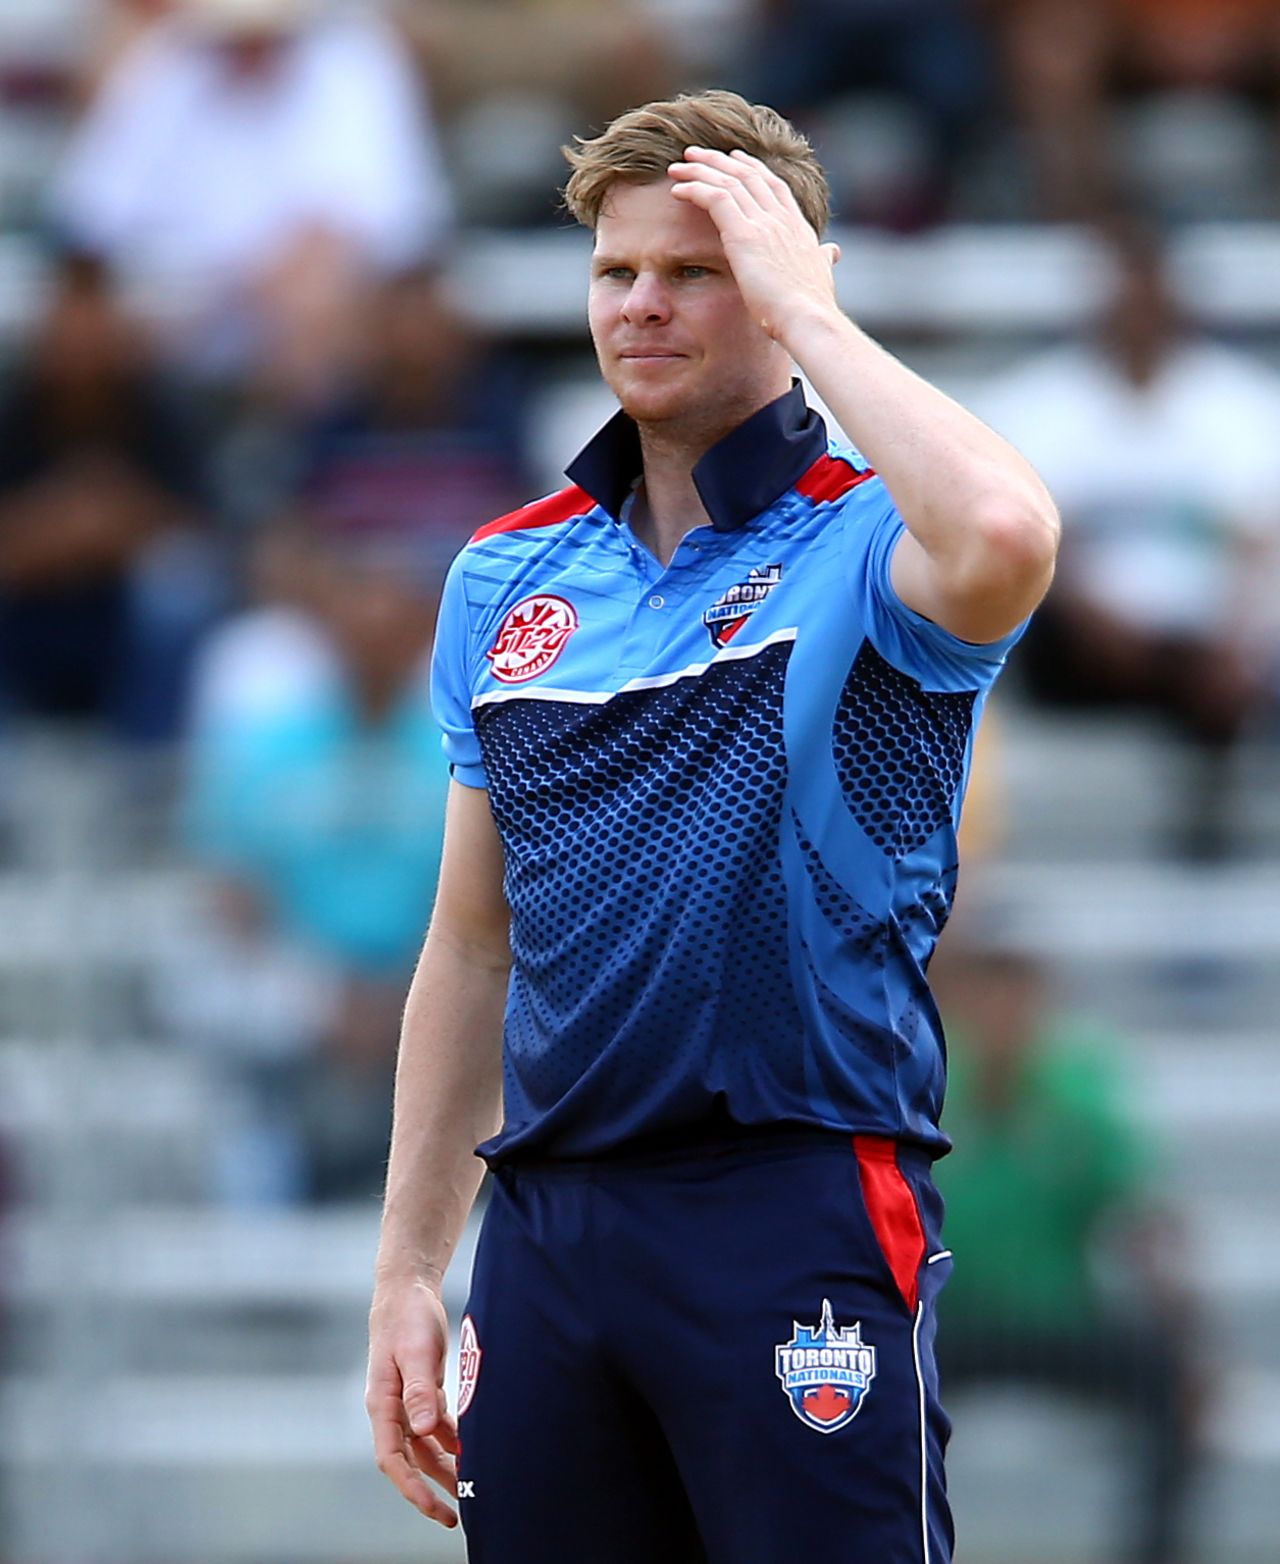 Steven Smith reacts while bowling, Canada GLT20, July 2, 2018